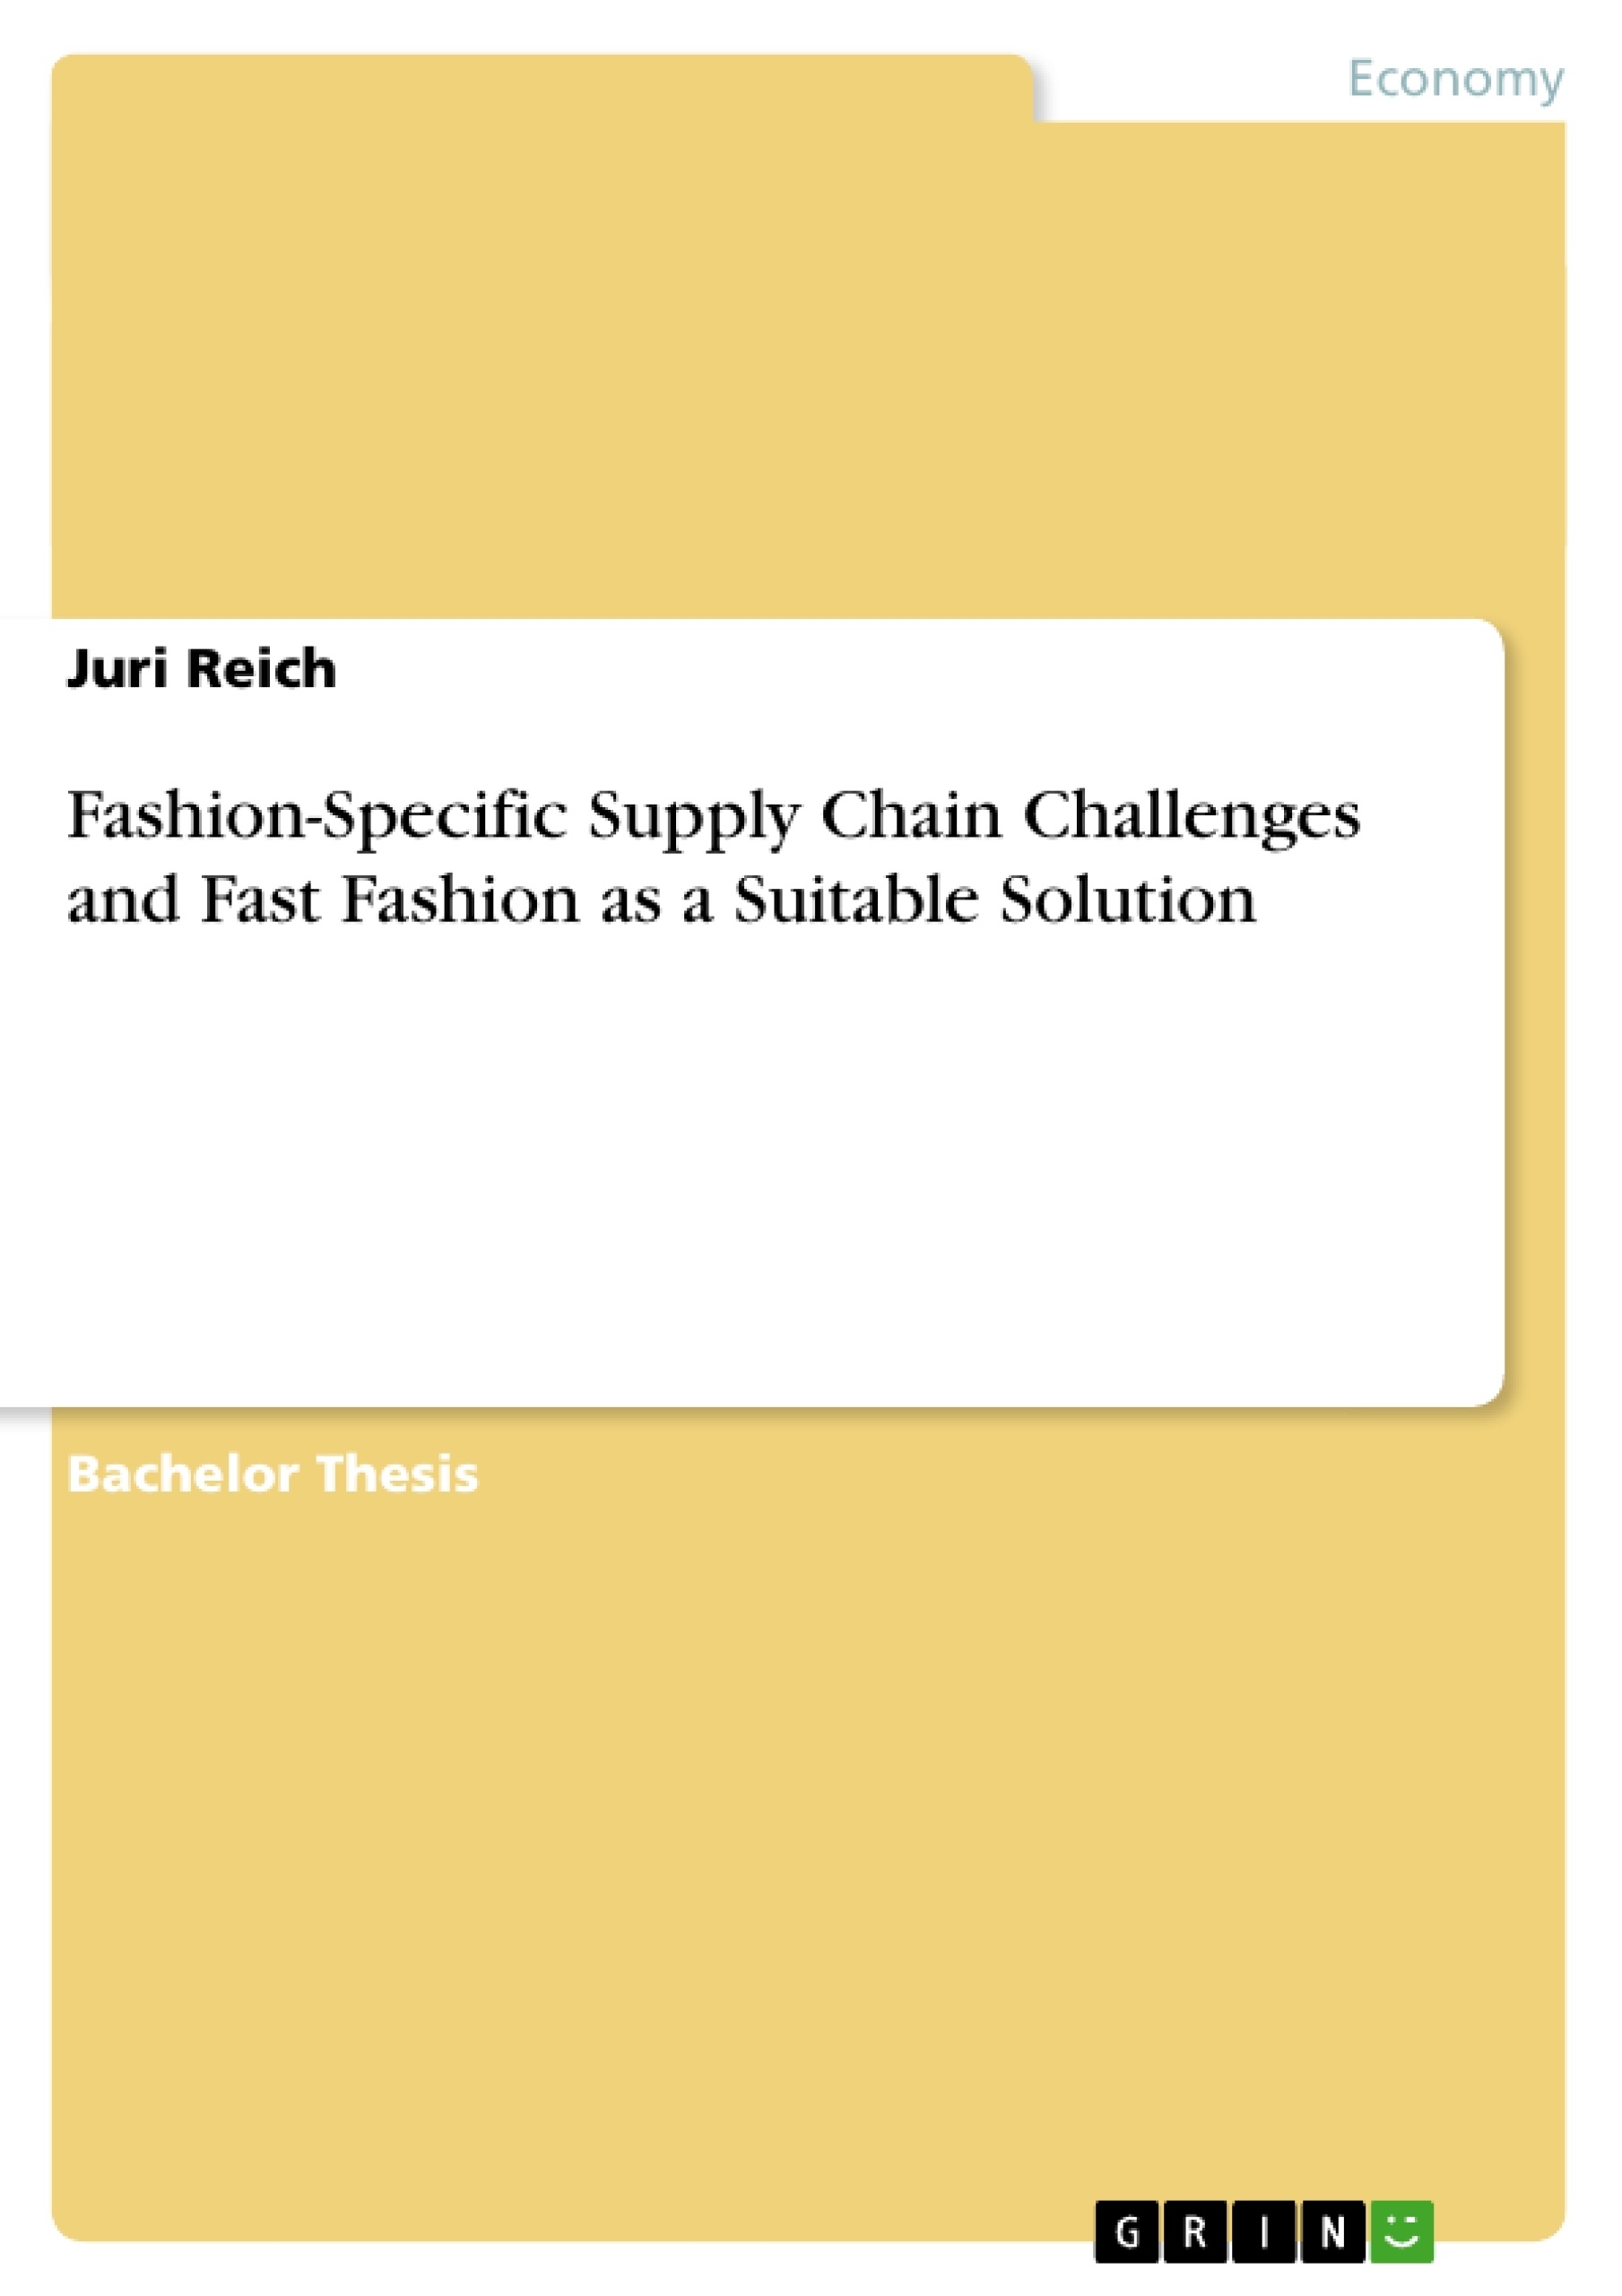 Title: Fashion-Specific Supply Chain Challenges and Fast Fashion as a Suitable Solution